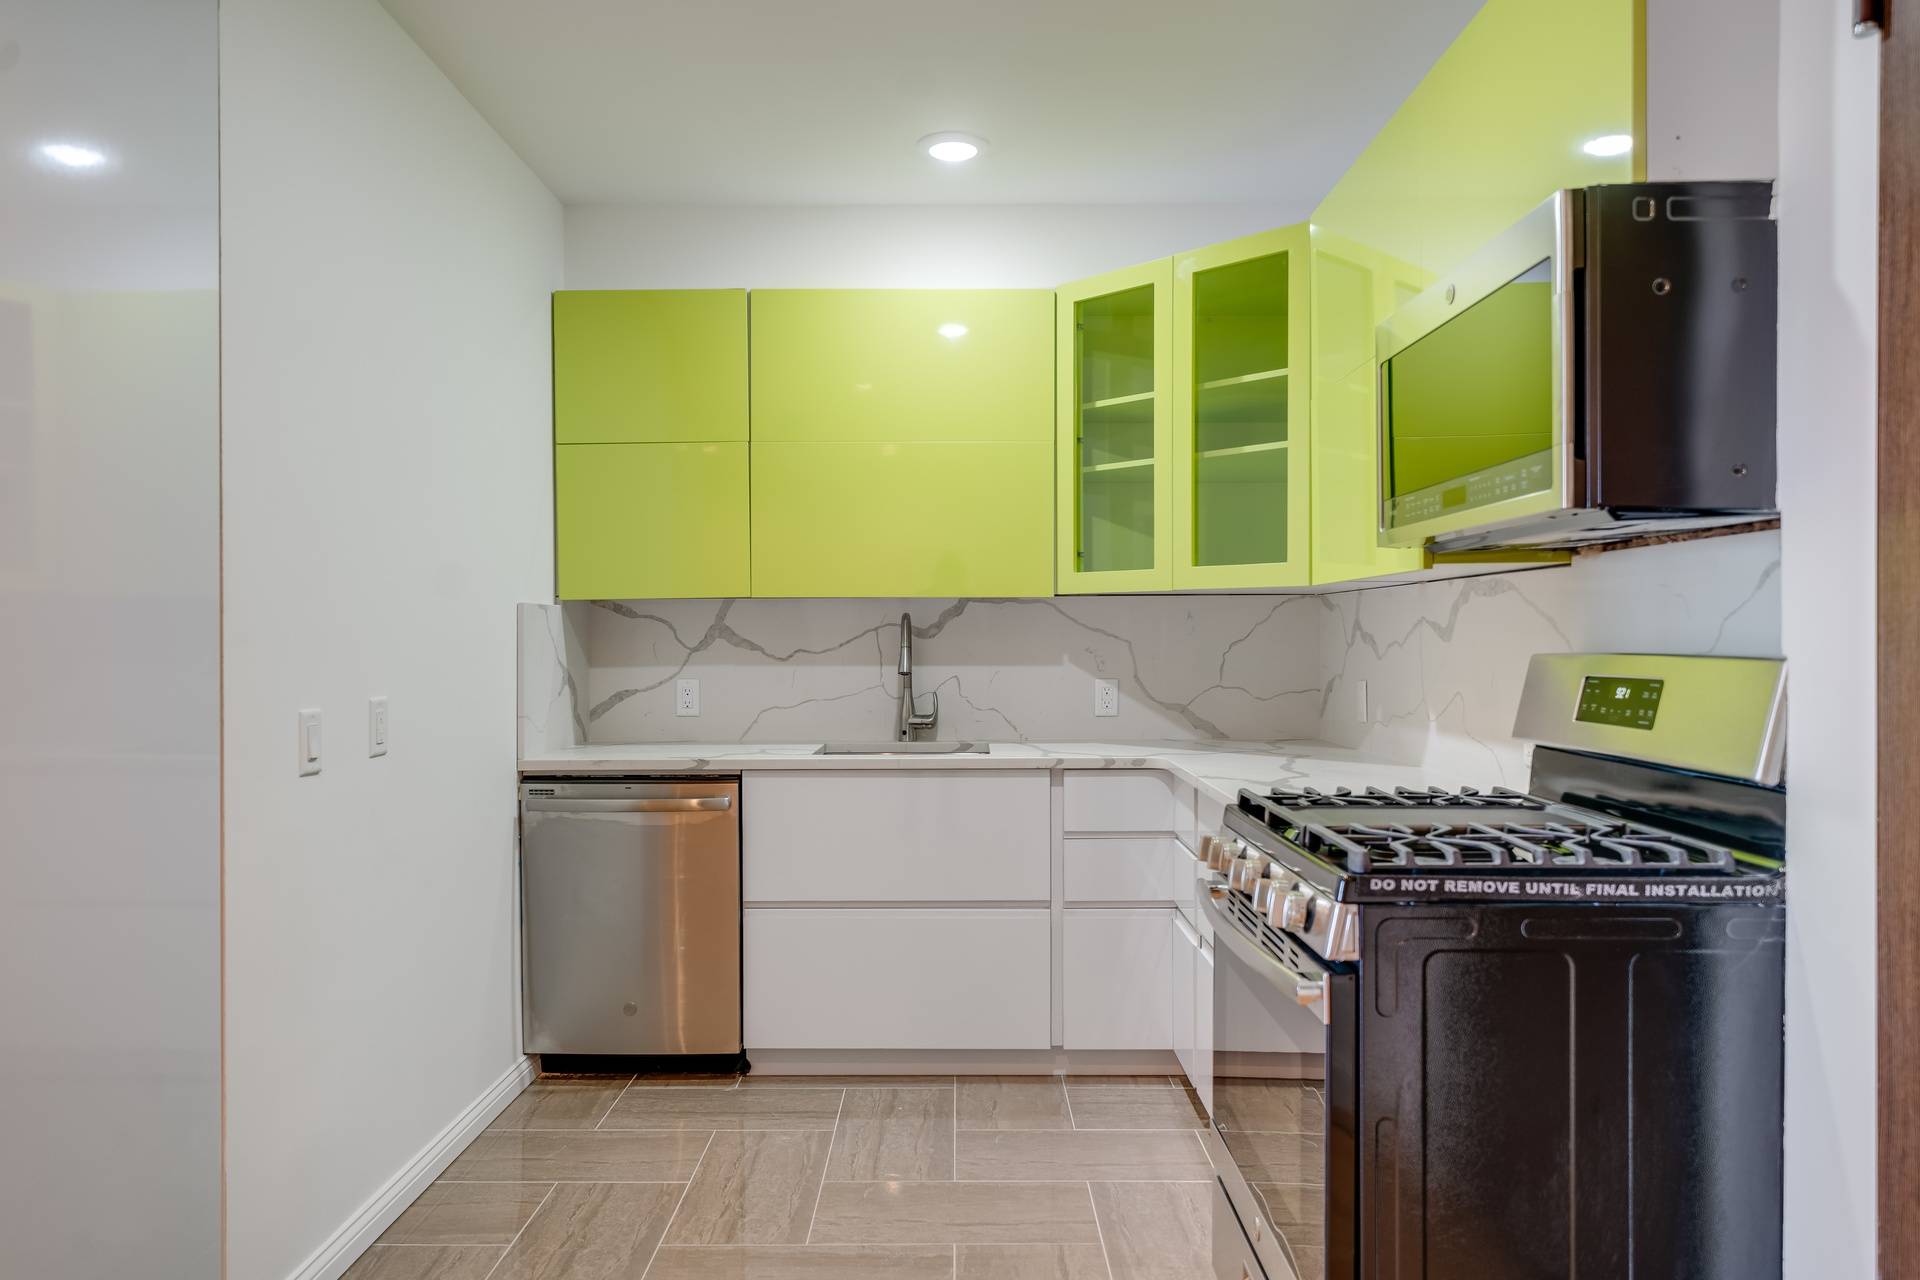 1 Month Free! 2 Bedrooms | 2 Bathrooms in Newest Luxury Building in Journal Square Jersey City!